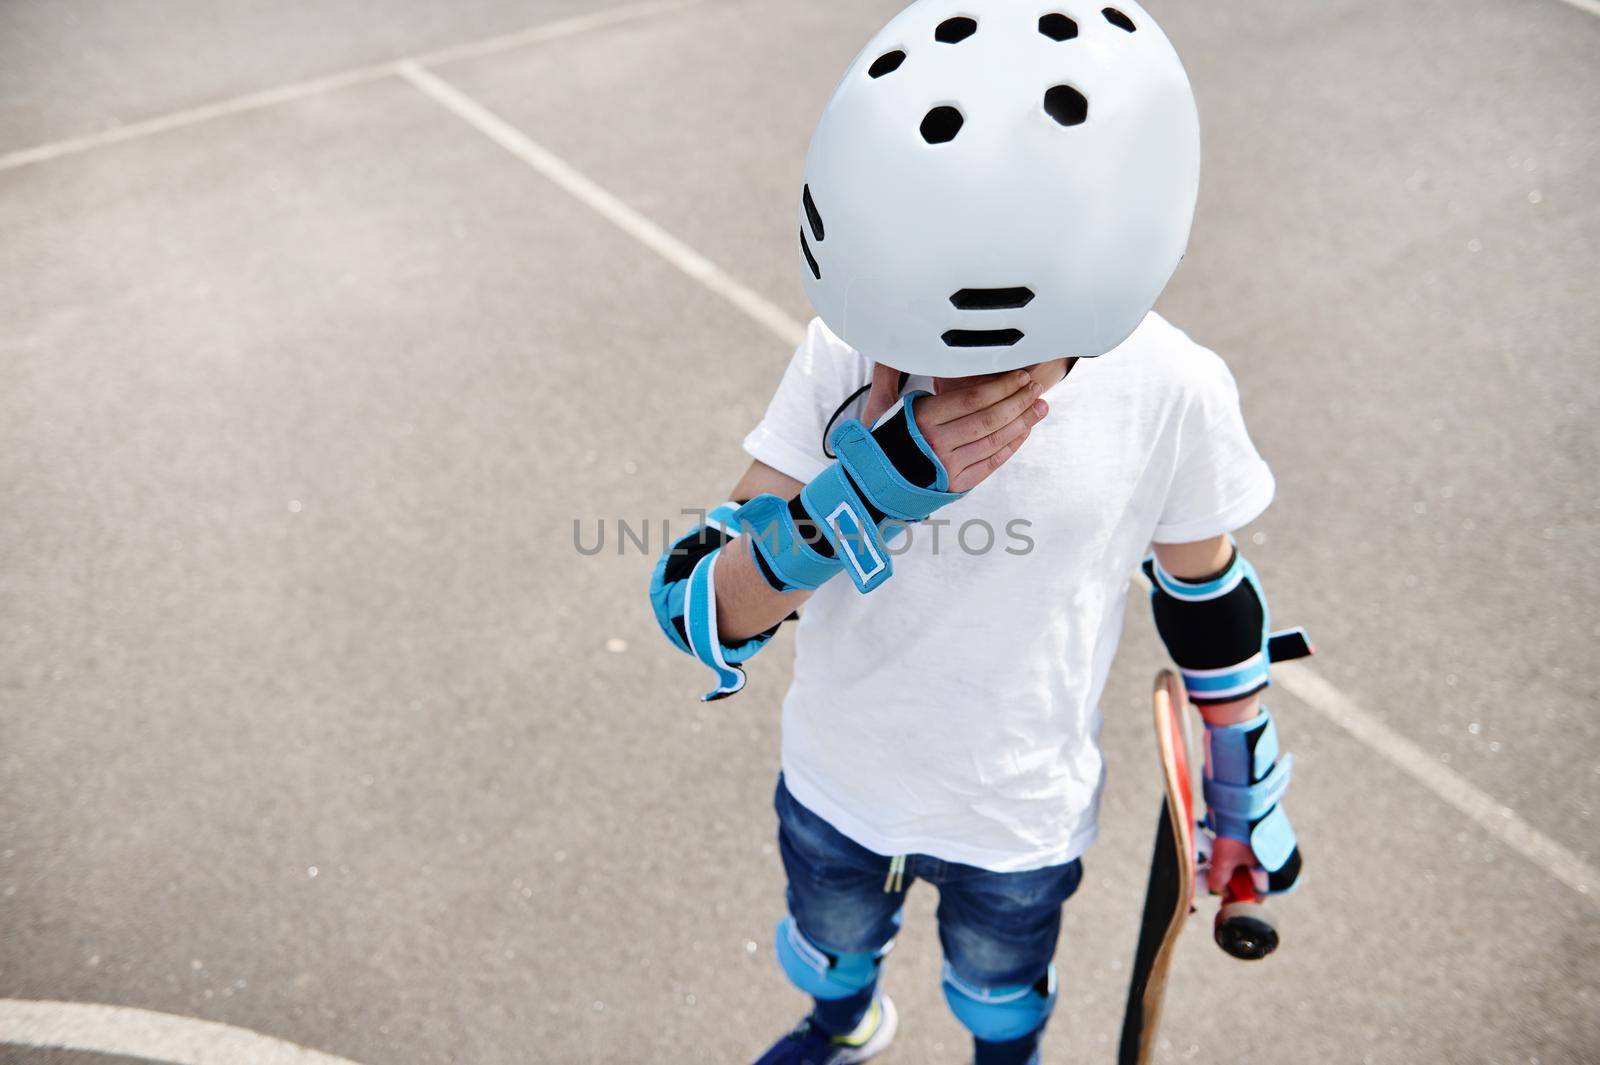 Teenage boy in protective helmet and gears holding a skateboard, looking down and wiping tears from his eyes by artgf